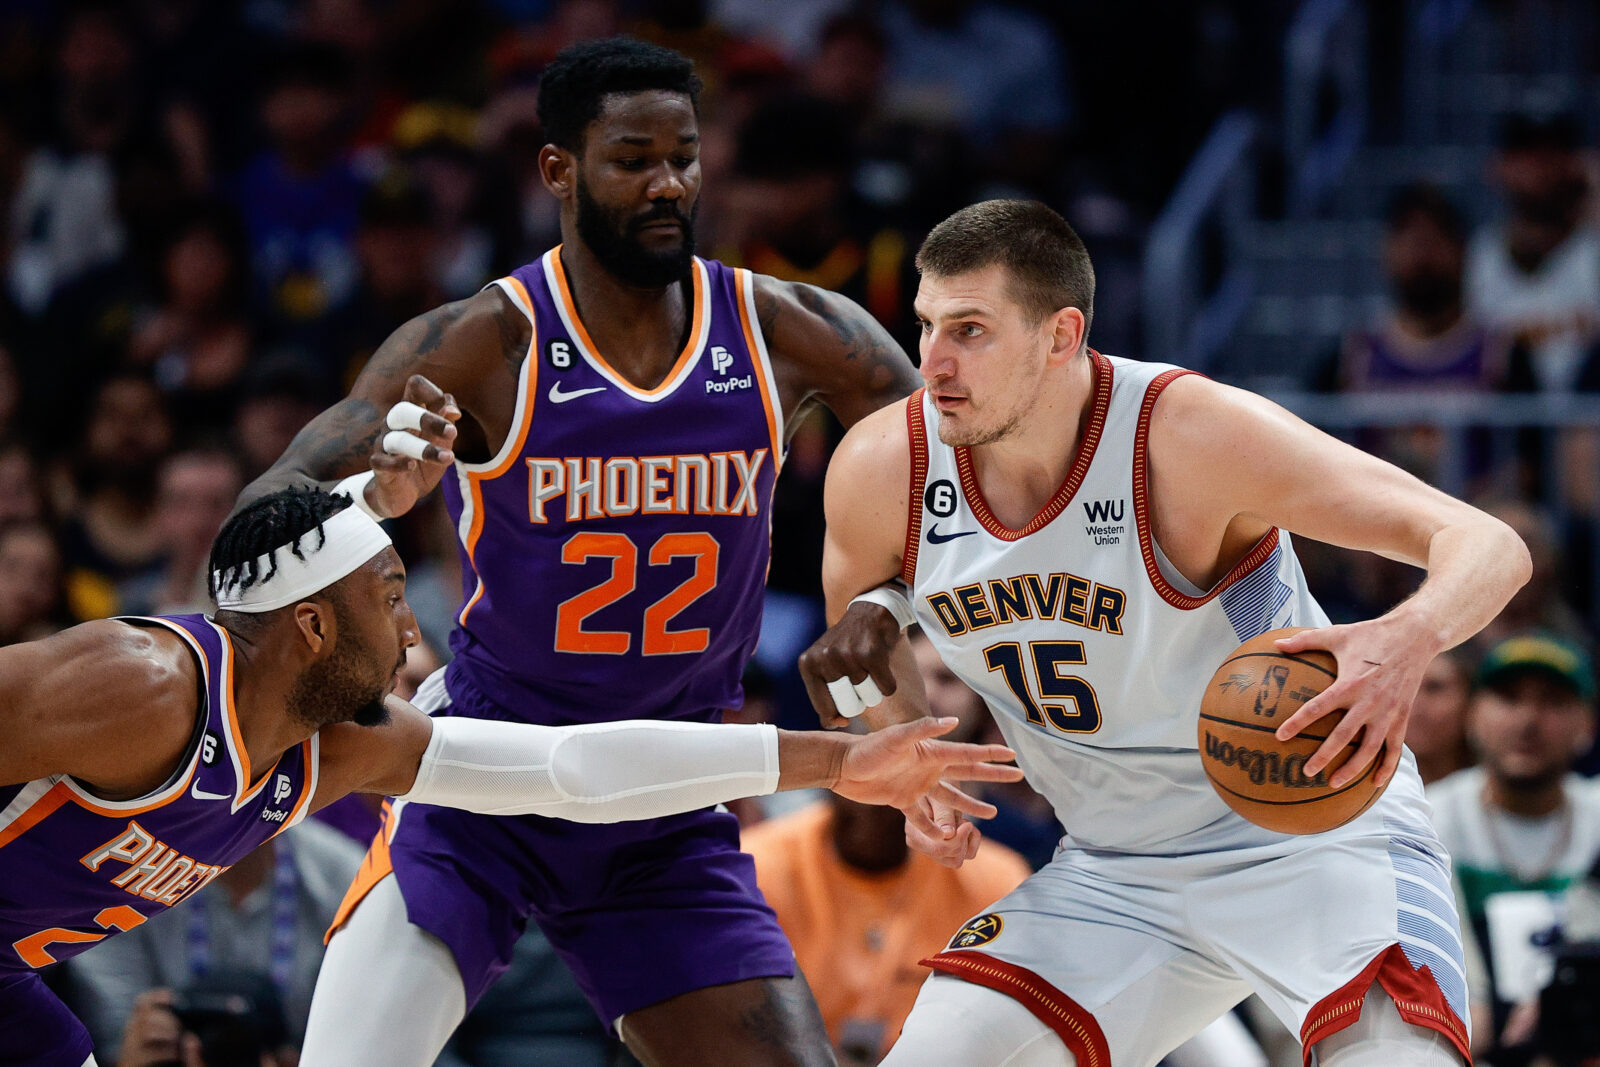 Recap Nuggets dominate second half to push series lead over Suns to 3